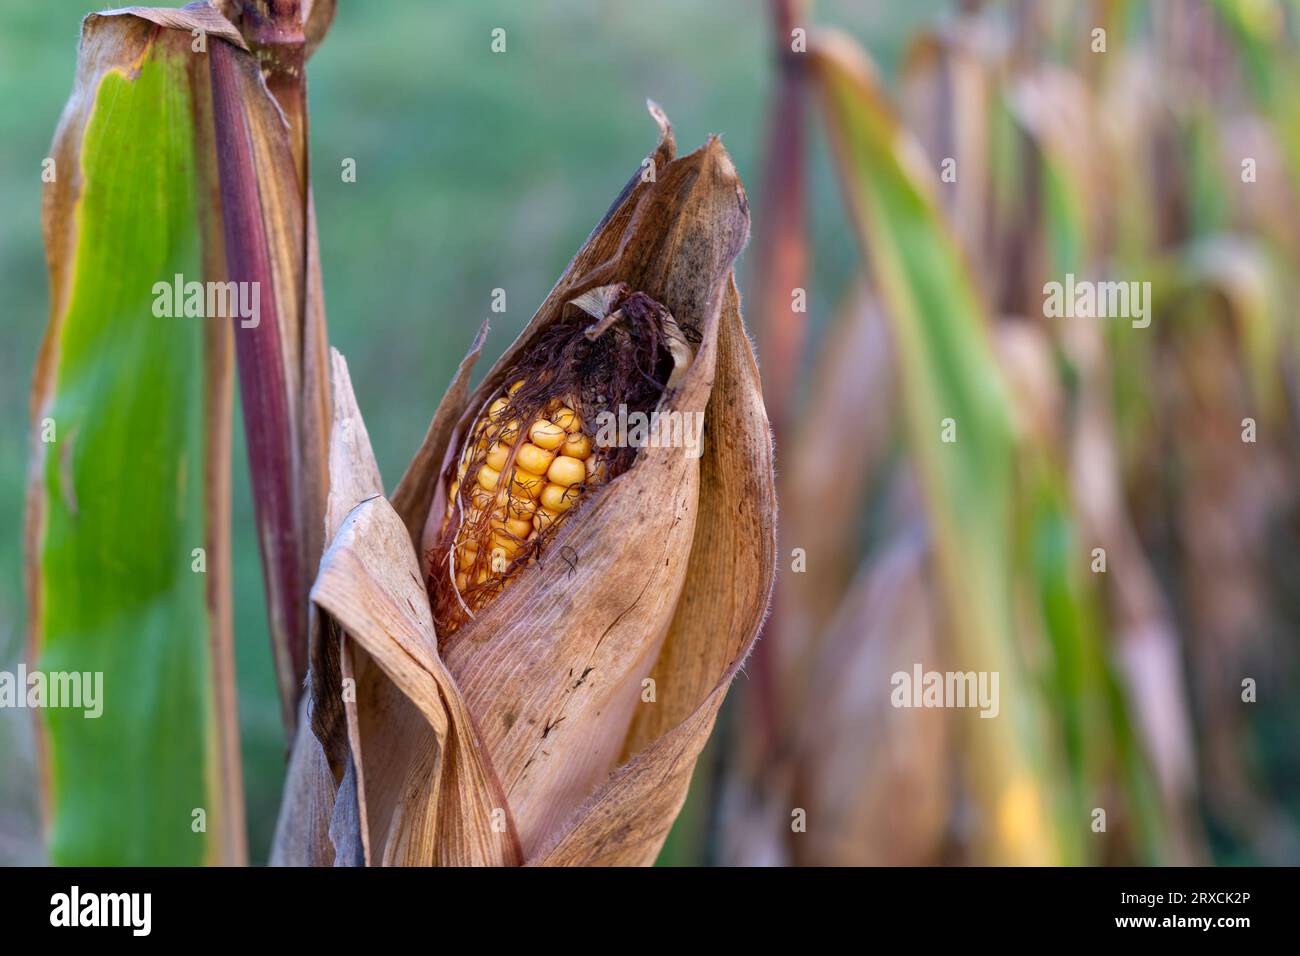 Yellow ripe corn (Zea Mays) head with brown dry leaves in autumn Stock Photo